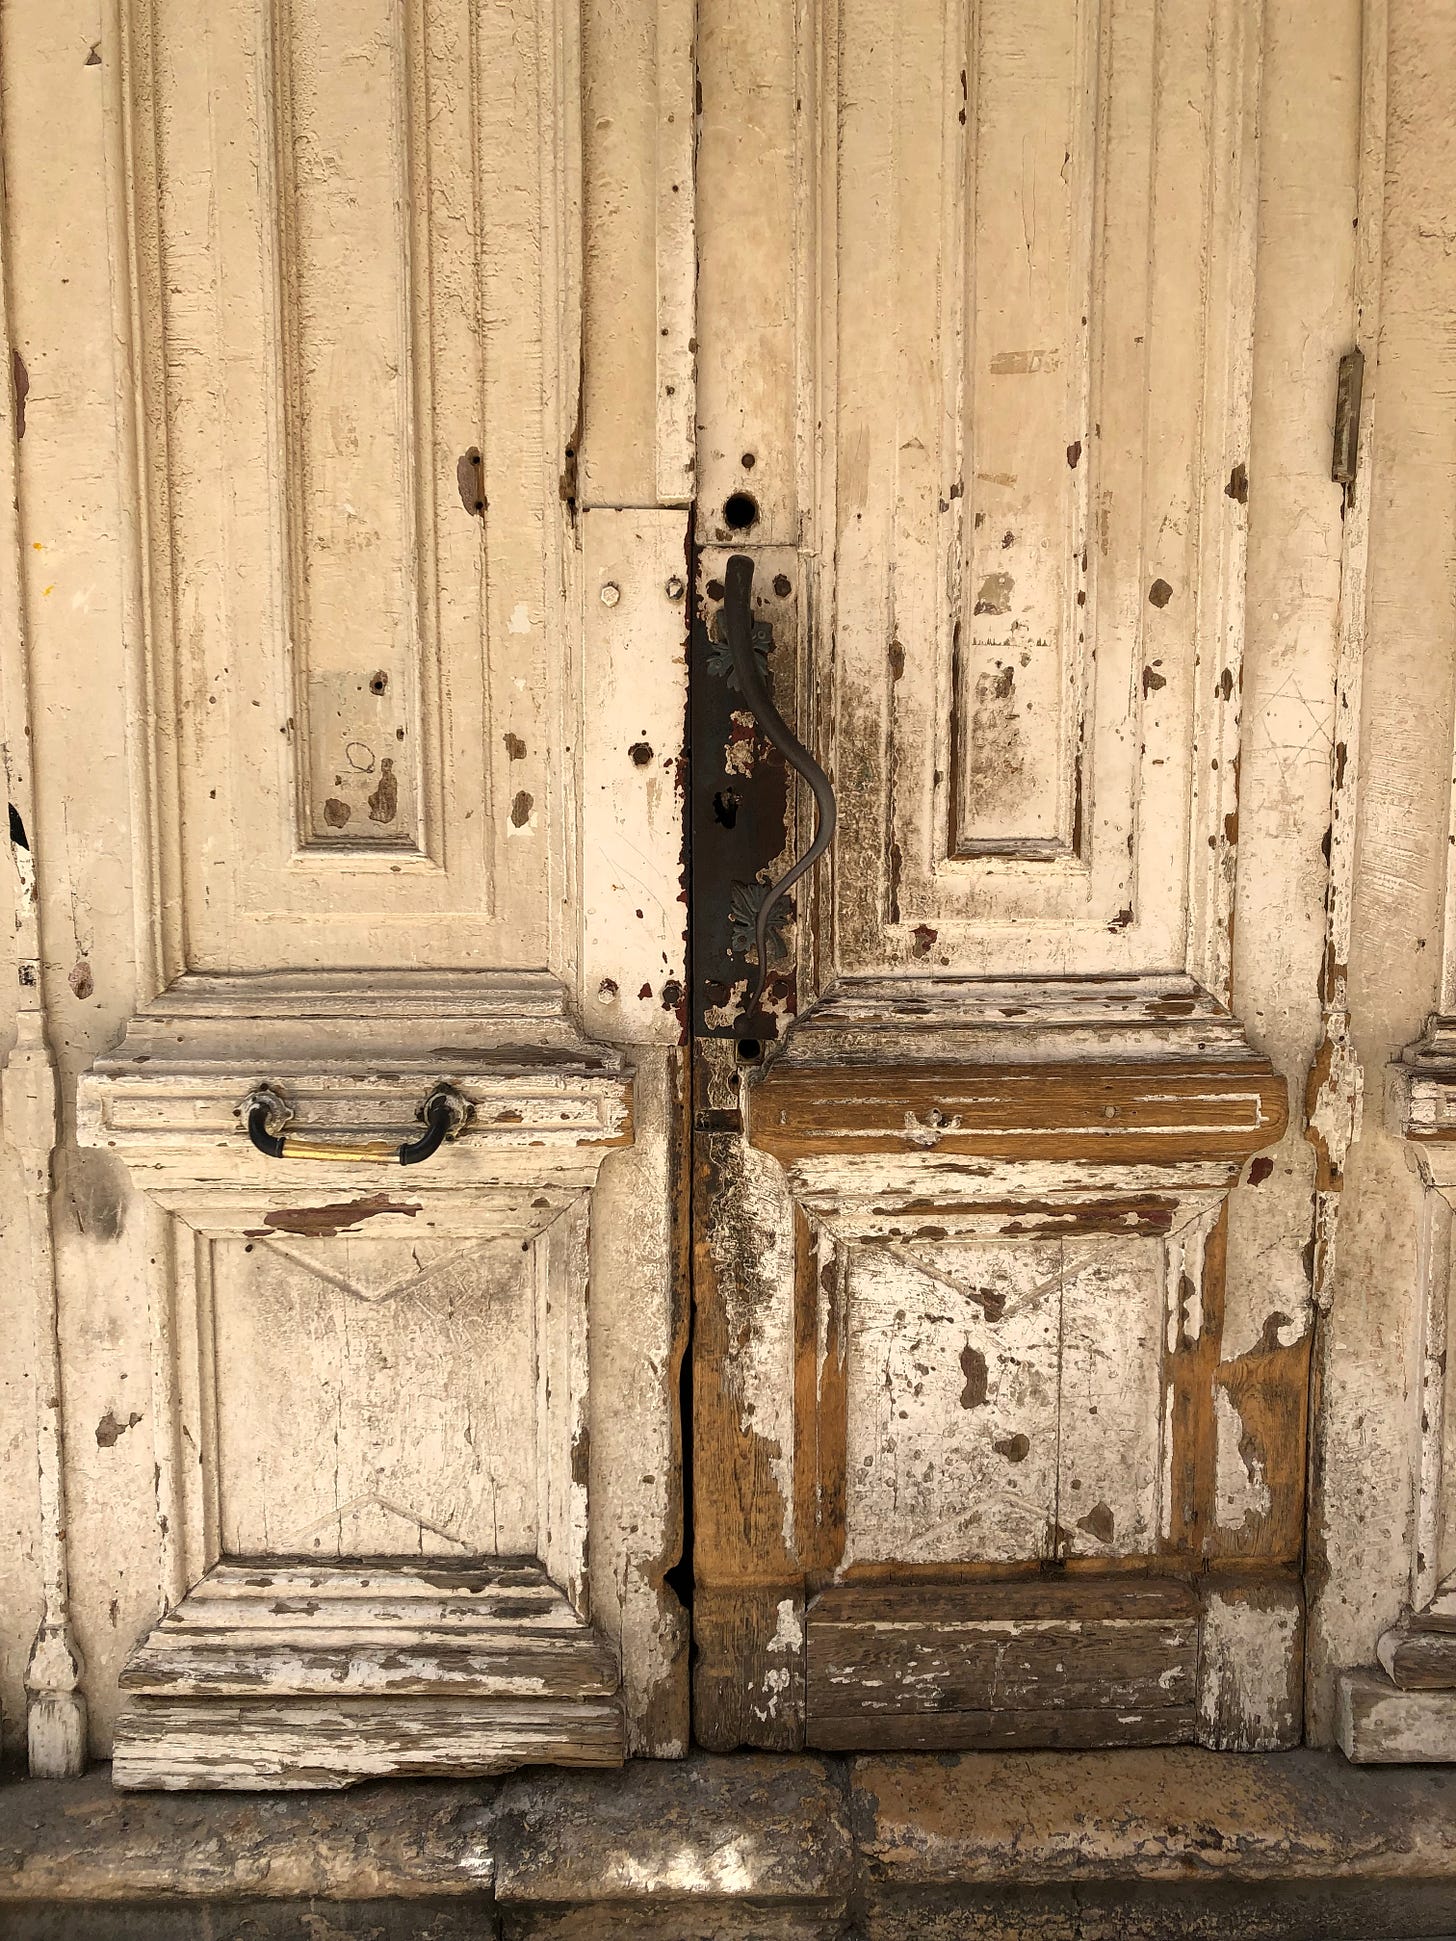 Image of an old, battered wooden door with chipped paint and lots of stories to tell